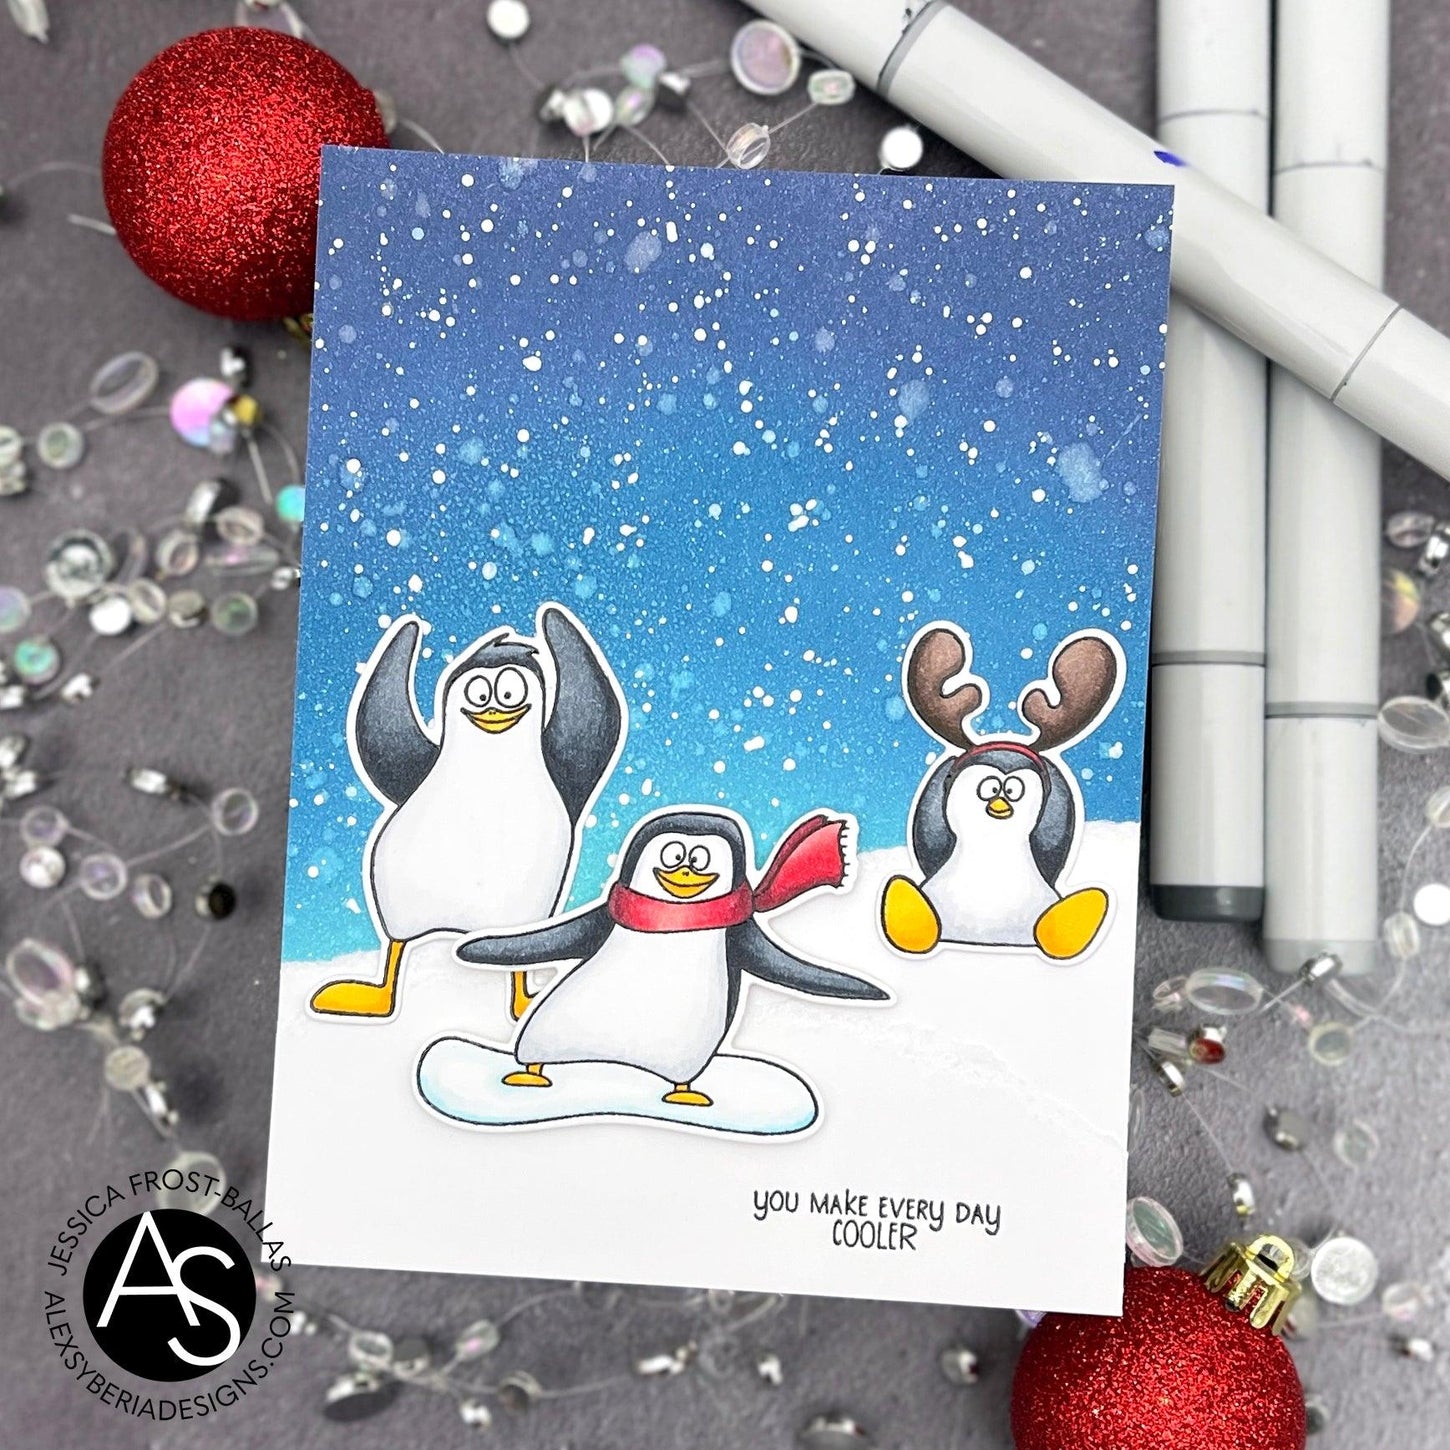 smile-and-wave-stamp-set-alex-syberia-designs-penguins-winter-christmas-stamps-sentiments-funny-snowboarding-stamp-copic-coloring-cardmakers-stamps